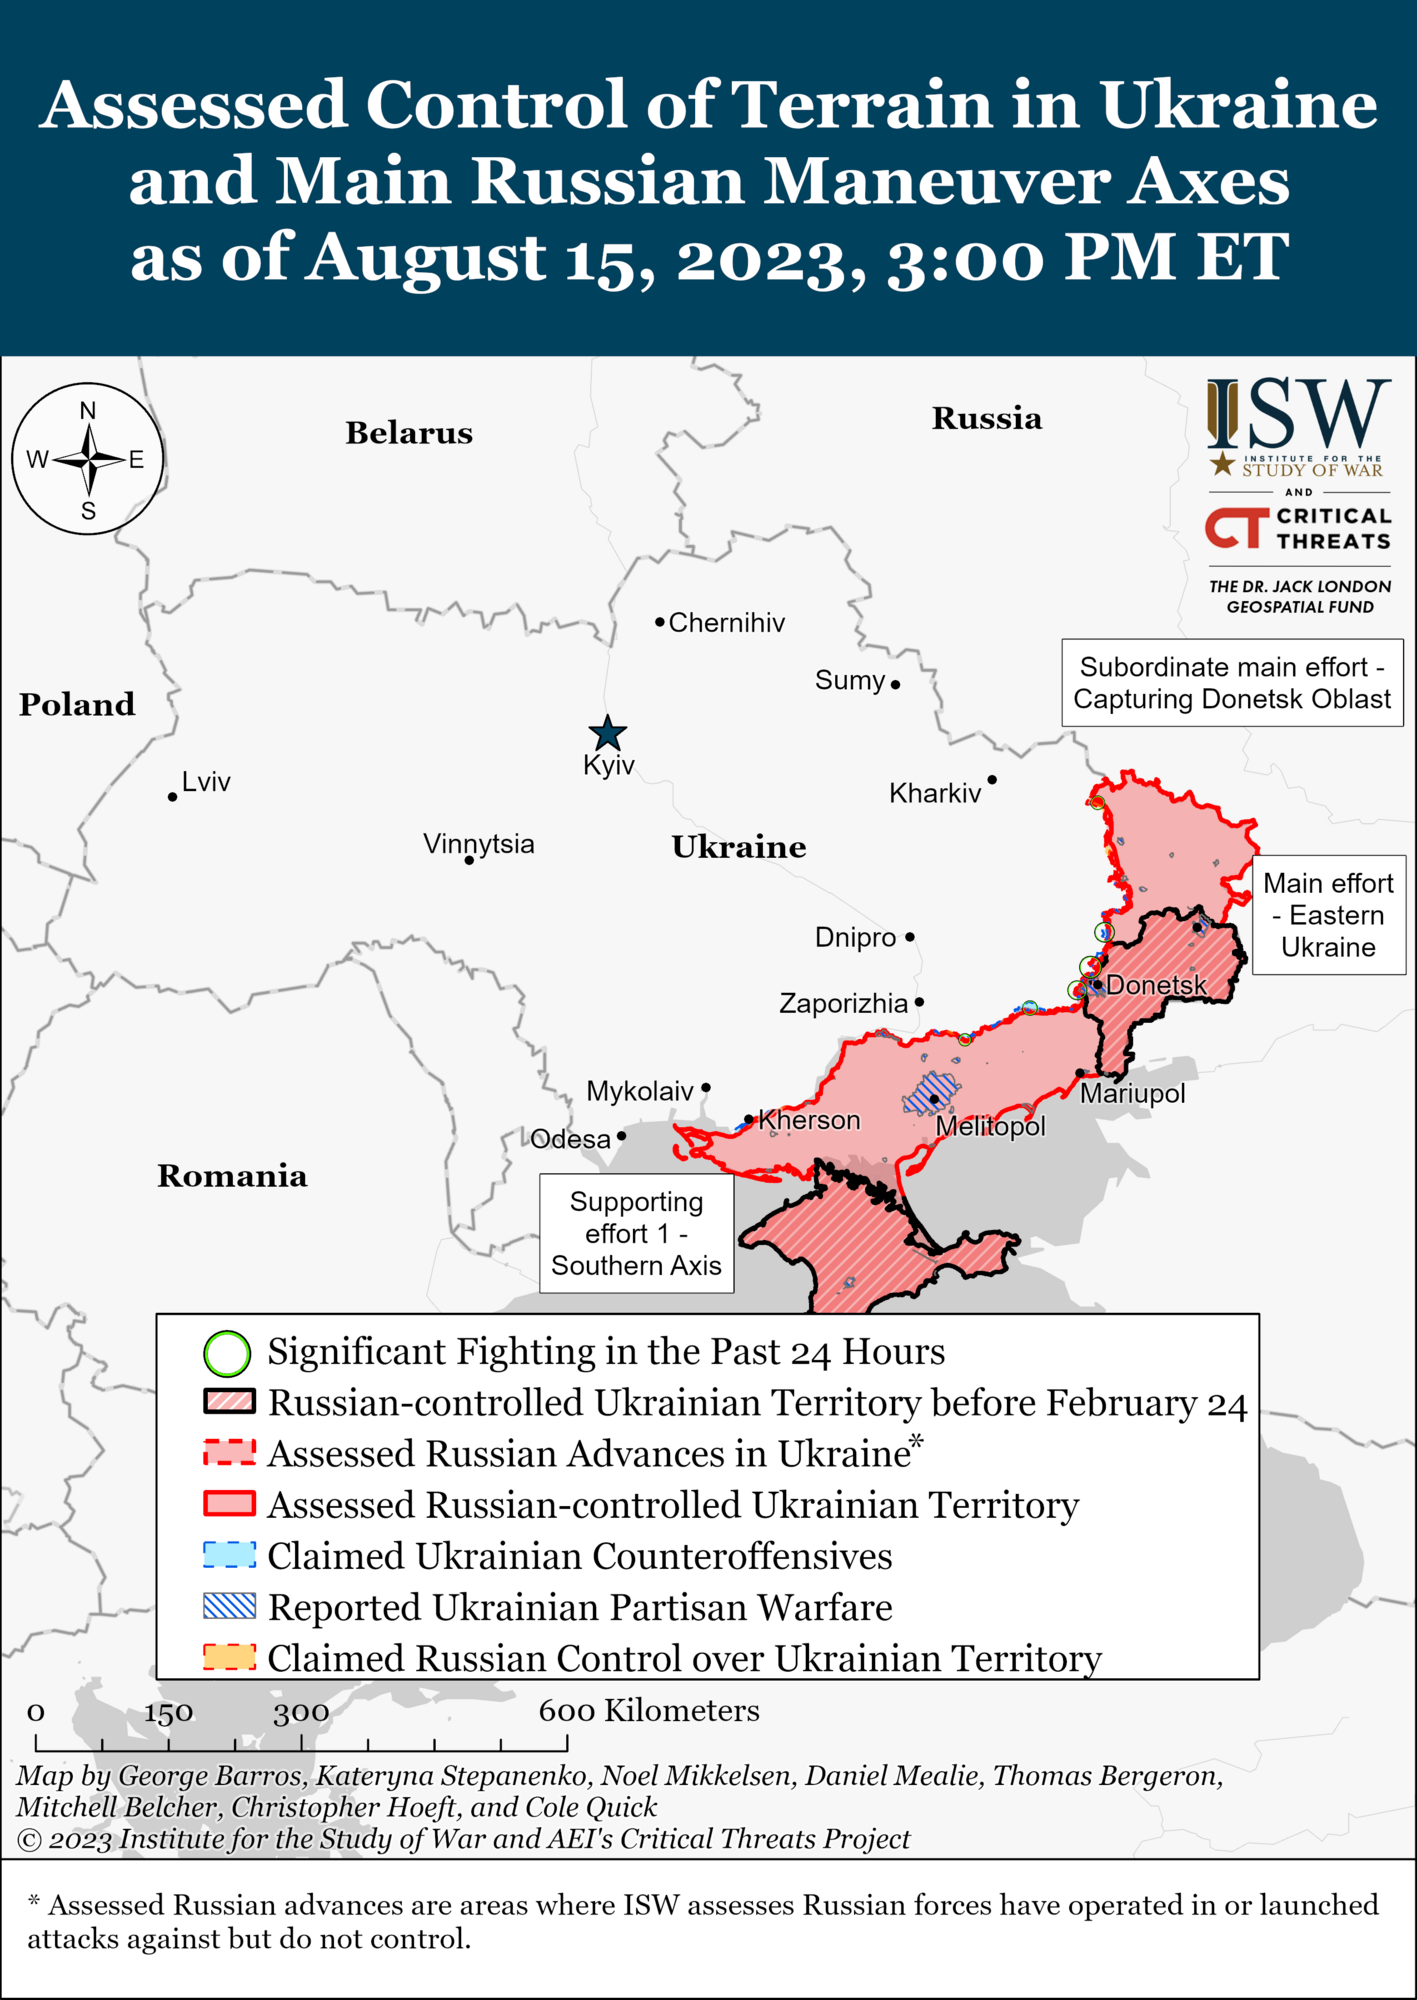 ISWL: Defense Forces advance in Luhansk and Western Zaporizhzhia regions